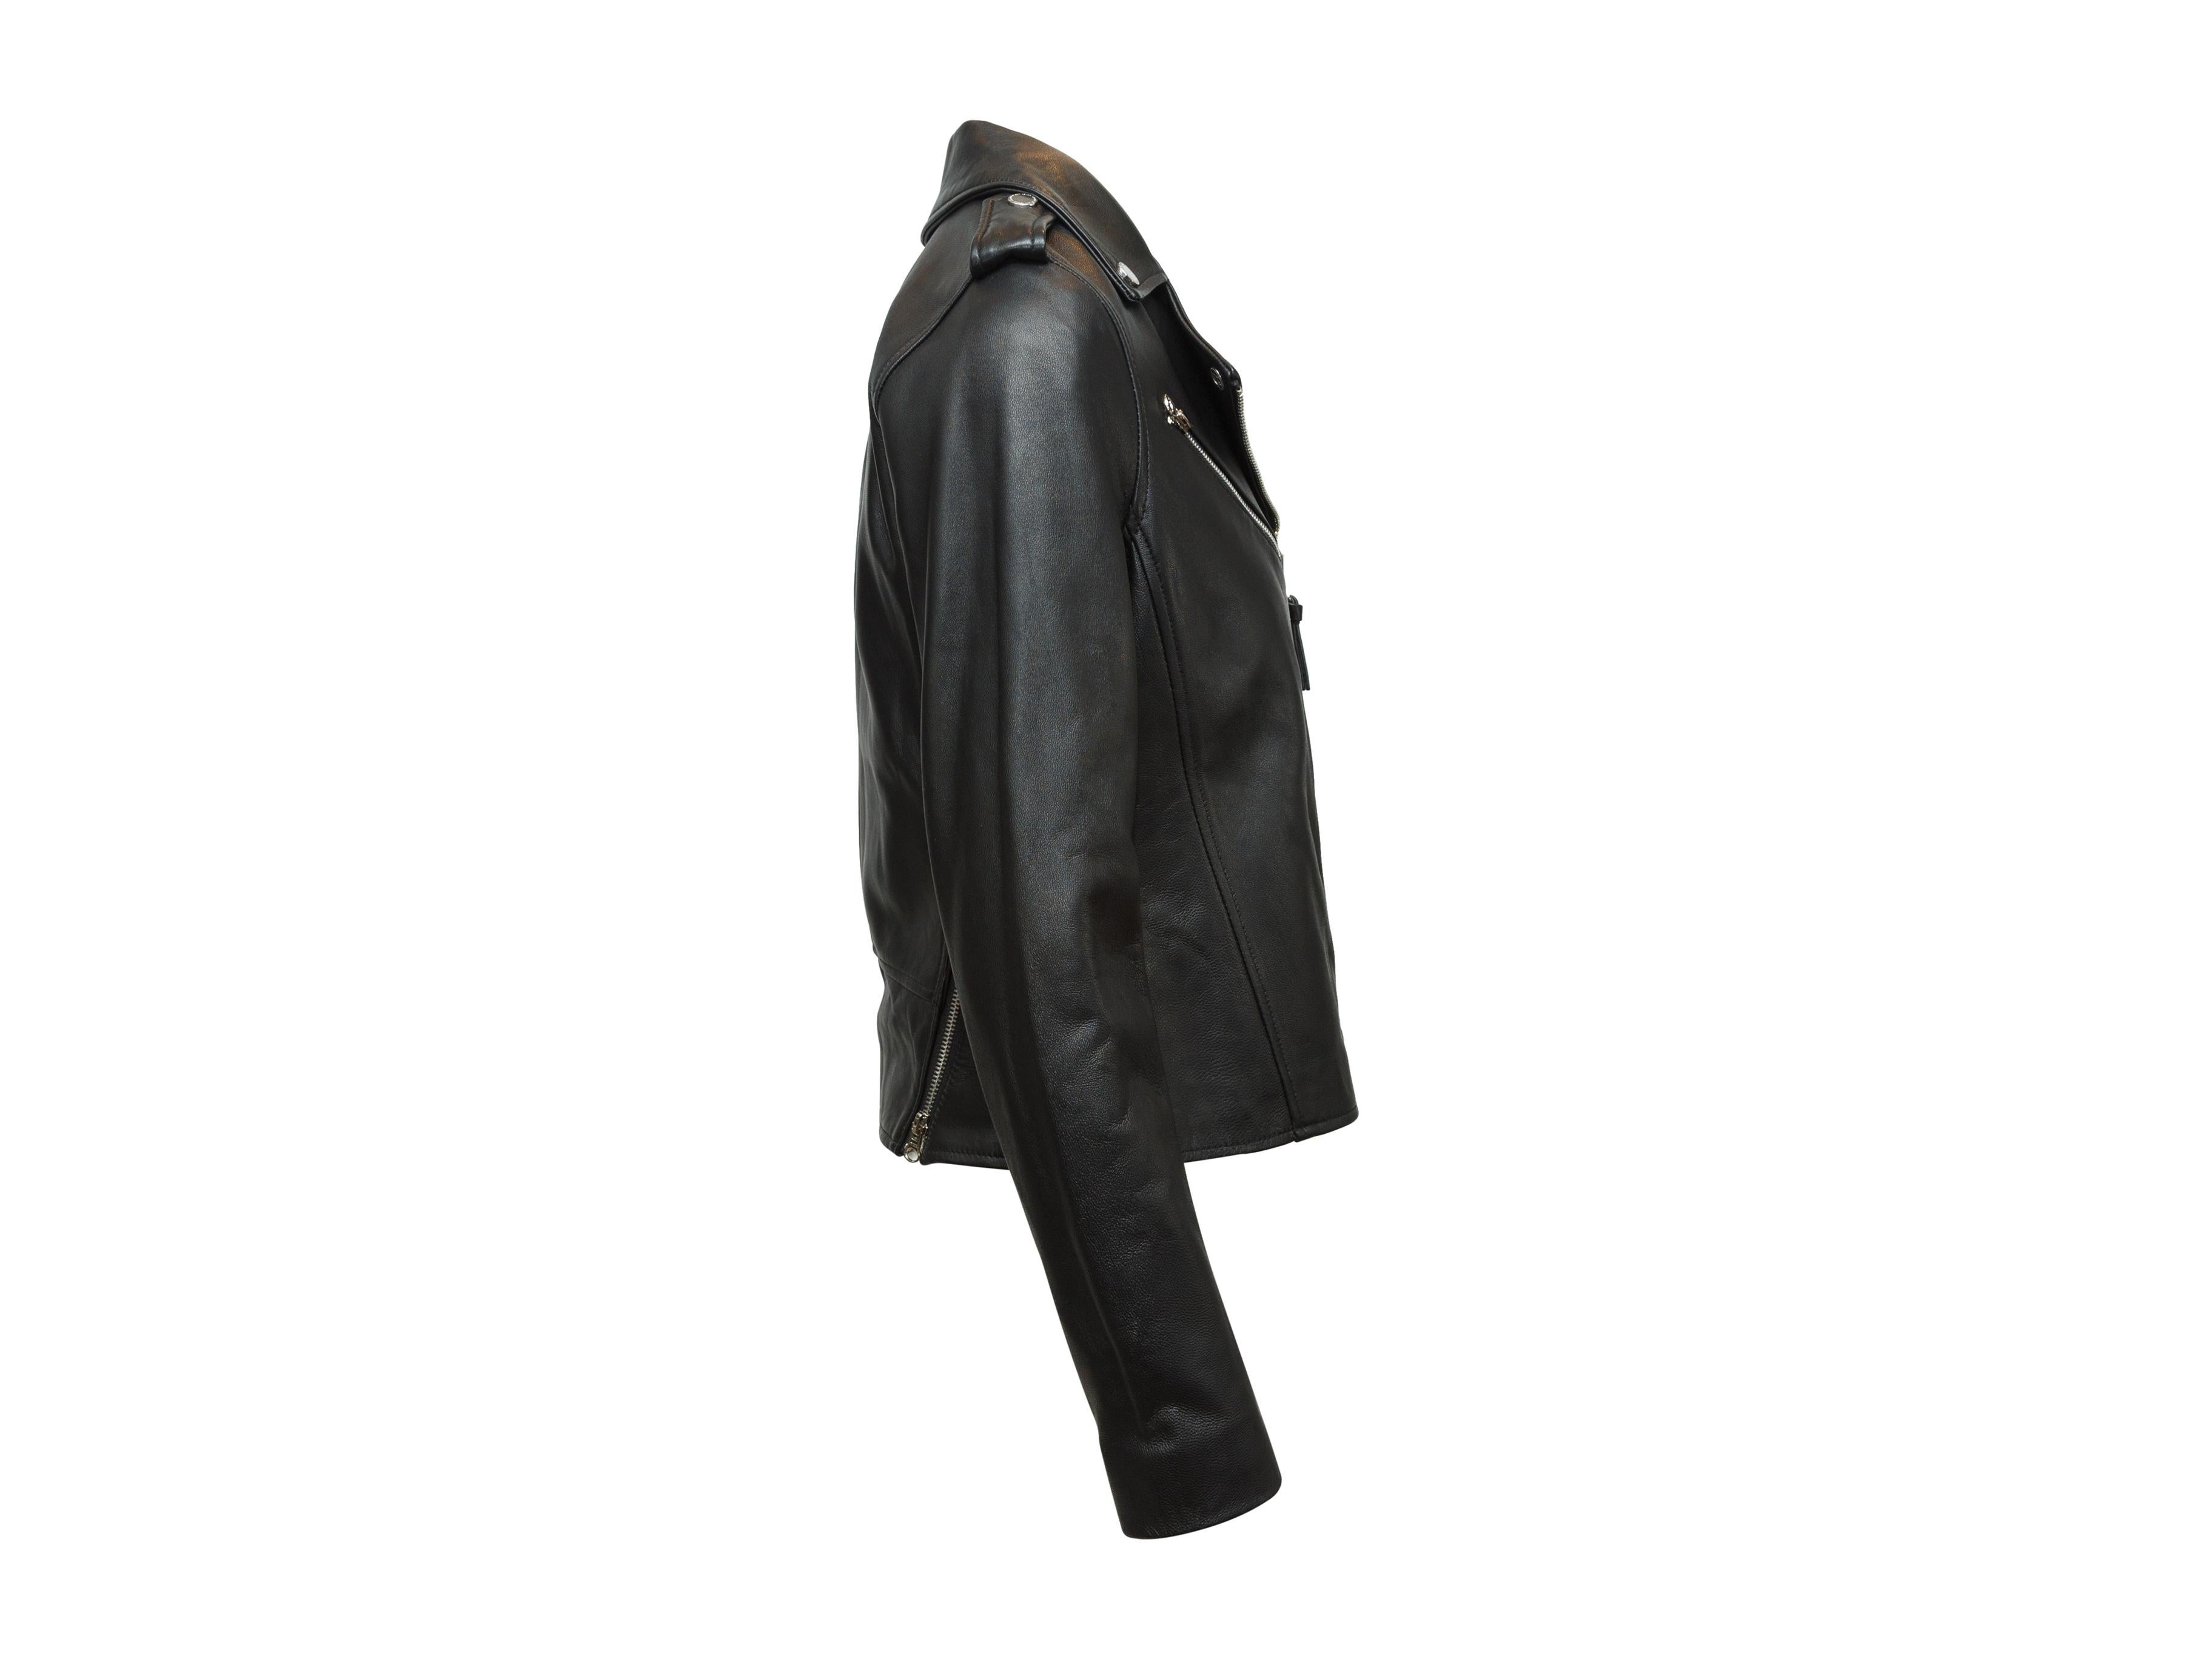 Product details: Black leather moto jacket by Derek Lam 10 Crosby. Silver-tone hardware. Notched lapel. Zip closure at front. 31